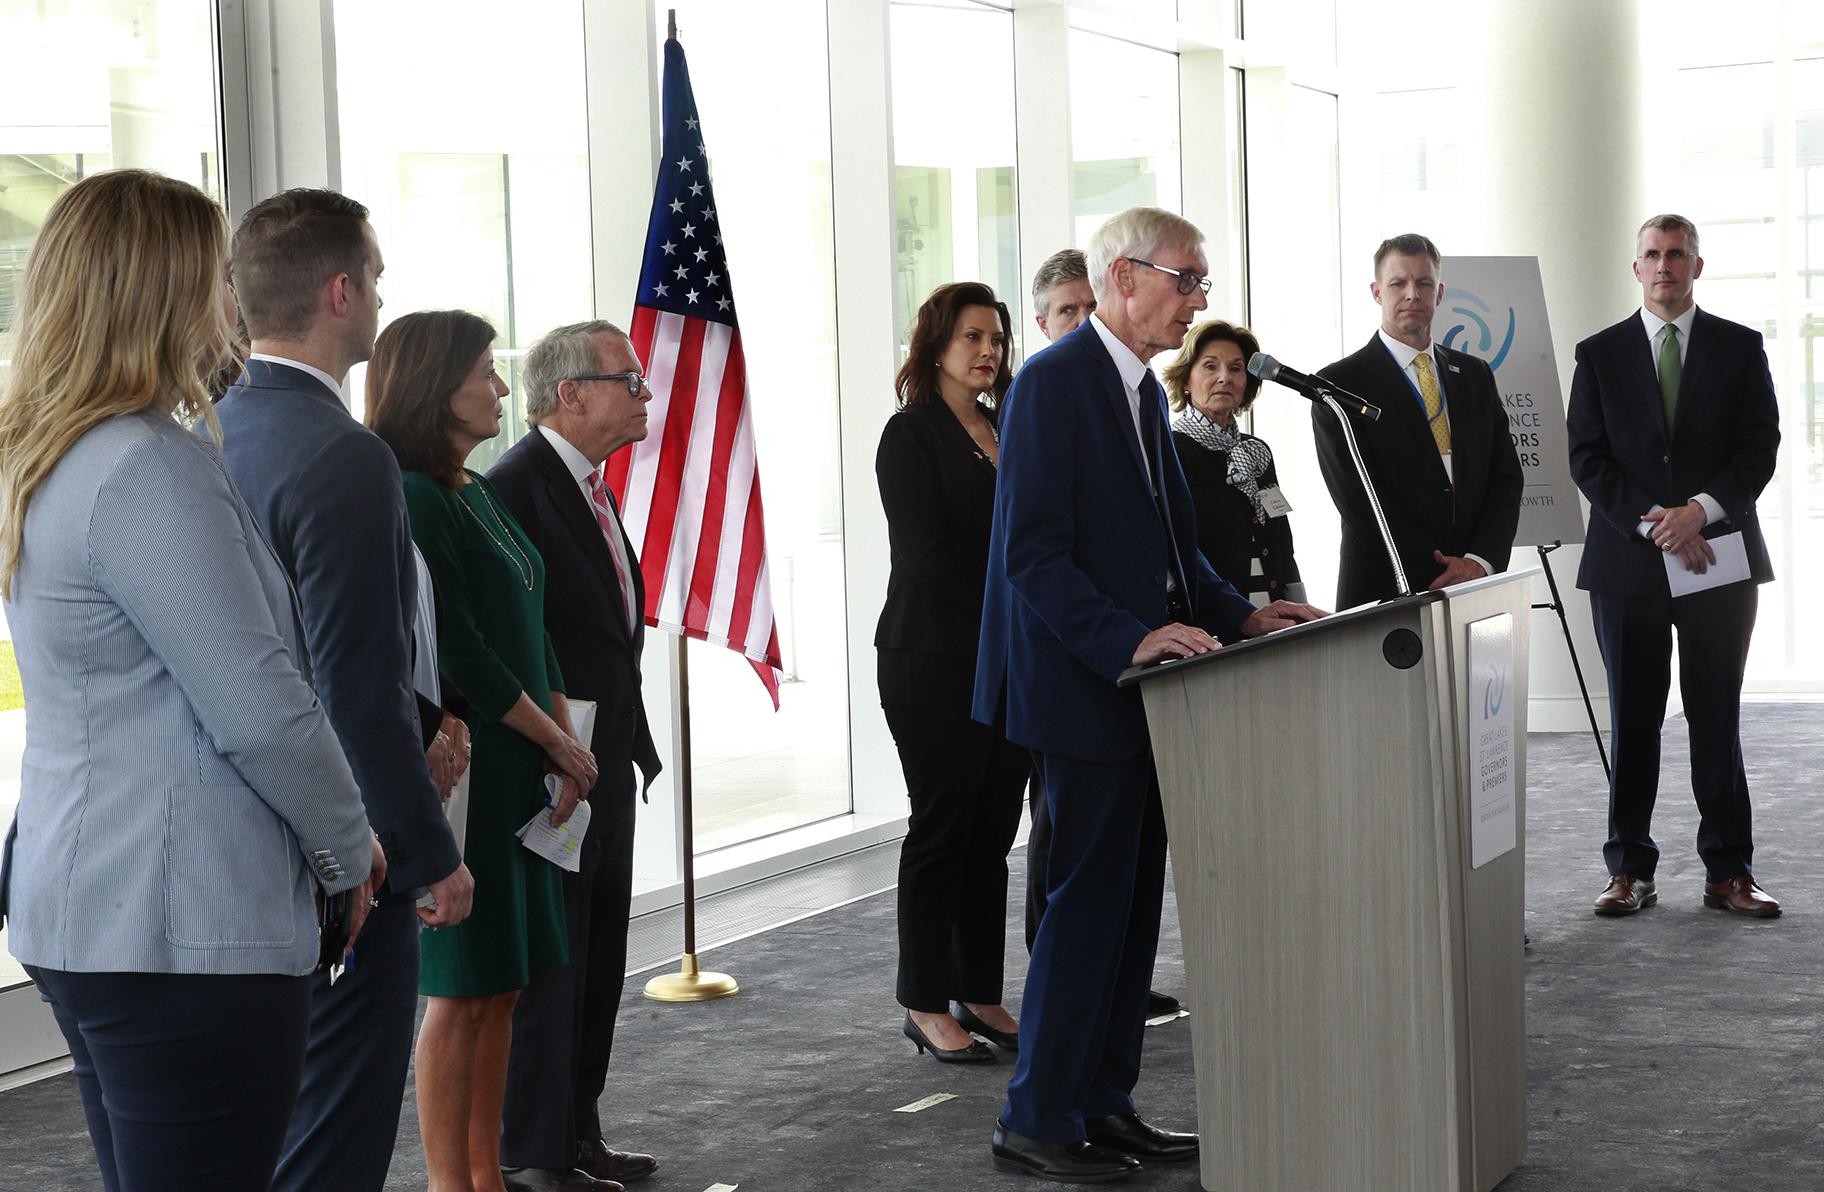 Wisconsin Gov. Tony Evers, center, is joined by other governors and premiers during a press conference at the 2019 Leadership Summit at the Discovery World, Friday, June 14, 2019, in Milwaukee, Wis., where leaders discussed actions on water, transportation, impact investing and tourism as related to the Great Lakes and Saint Lawrence River. (Angela Peterson/Milwaukee Journal-Sentinel via AP)